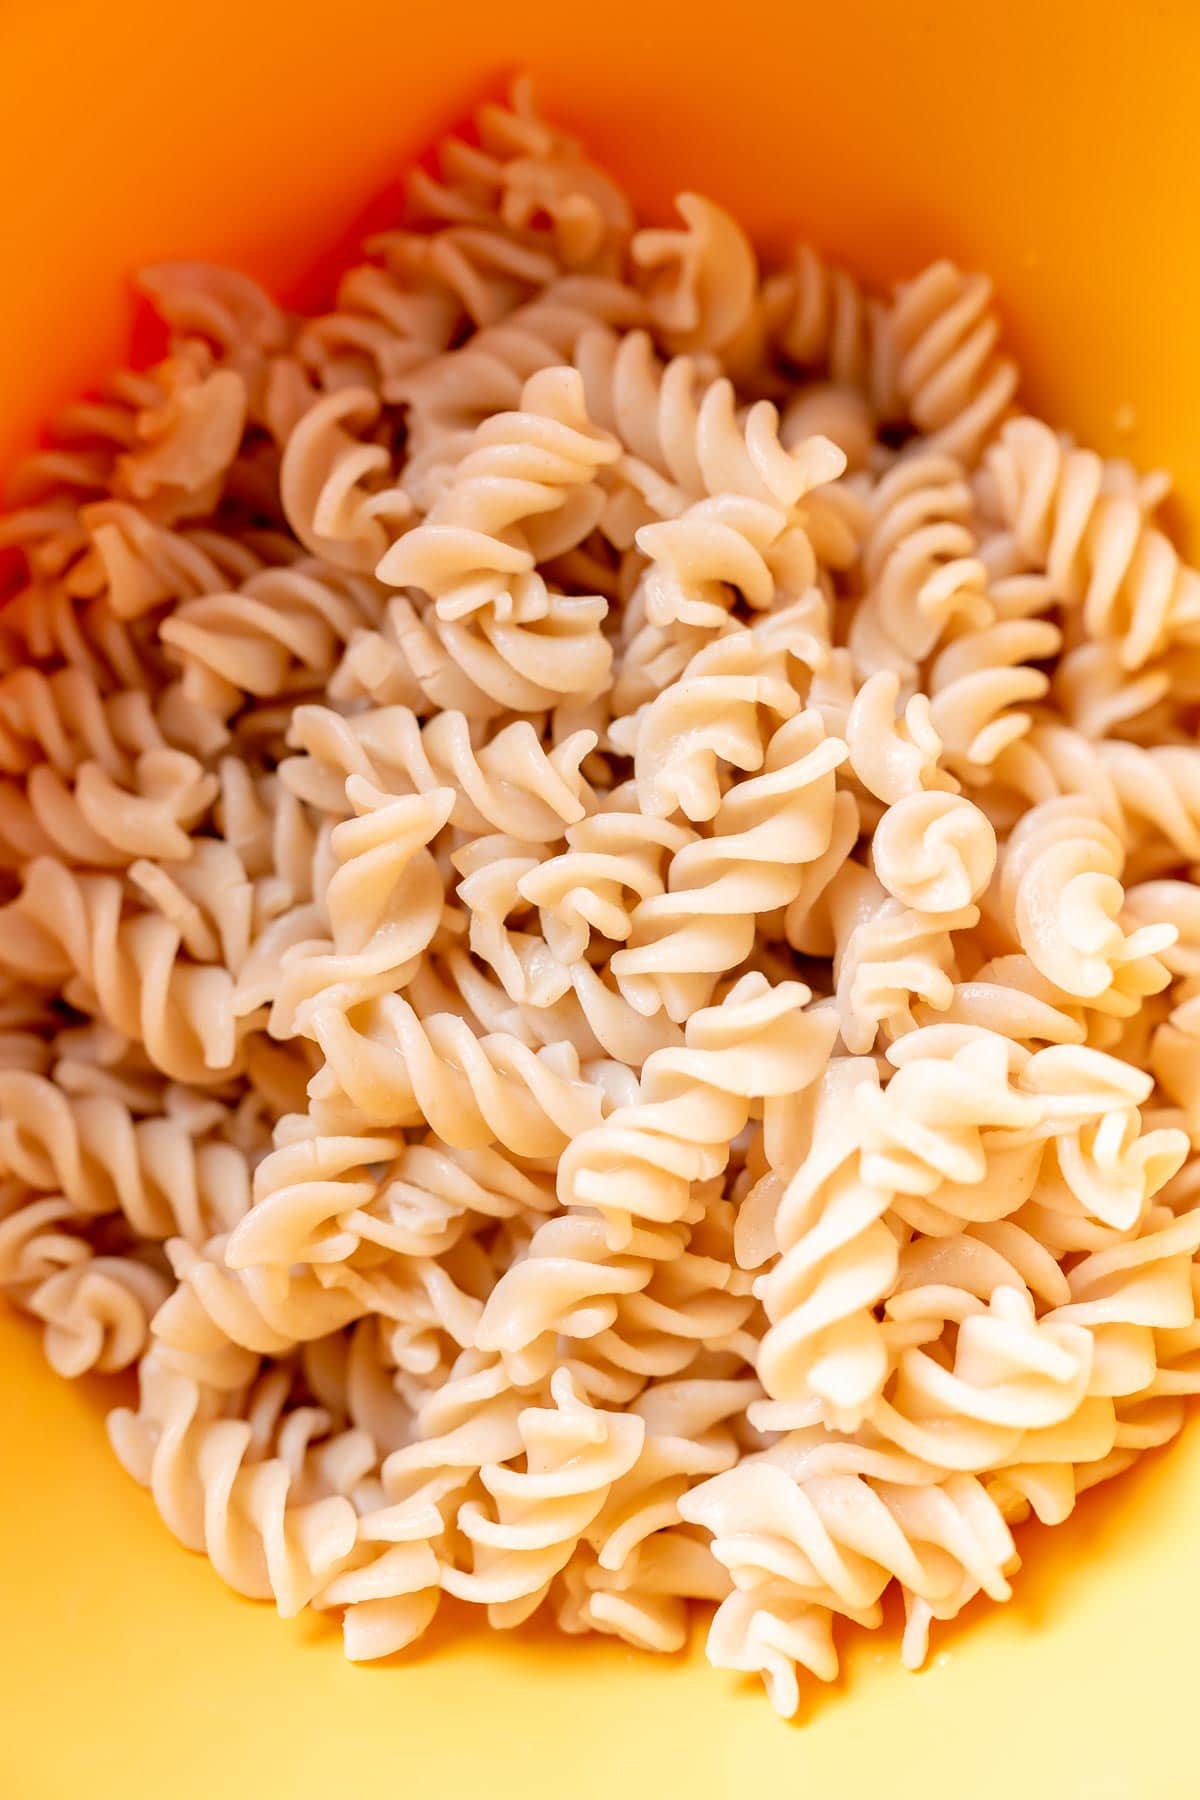 A yellow bowl of cooked fusilli pasta noodles.